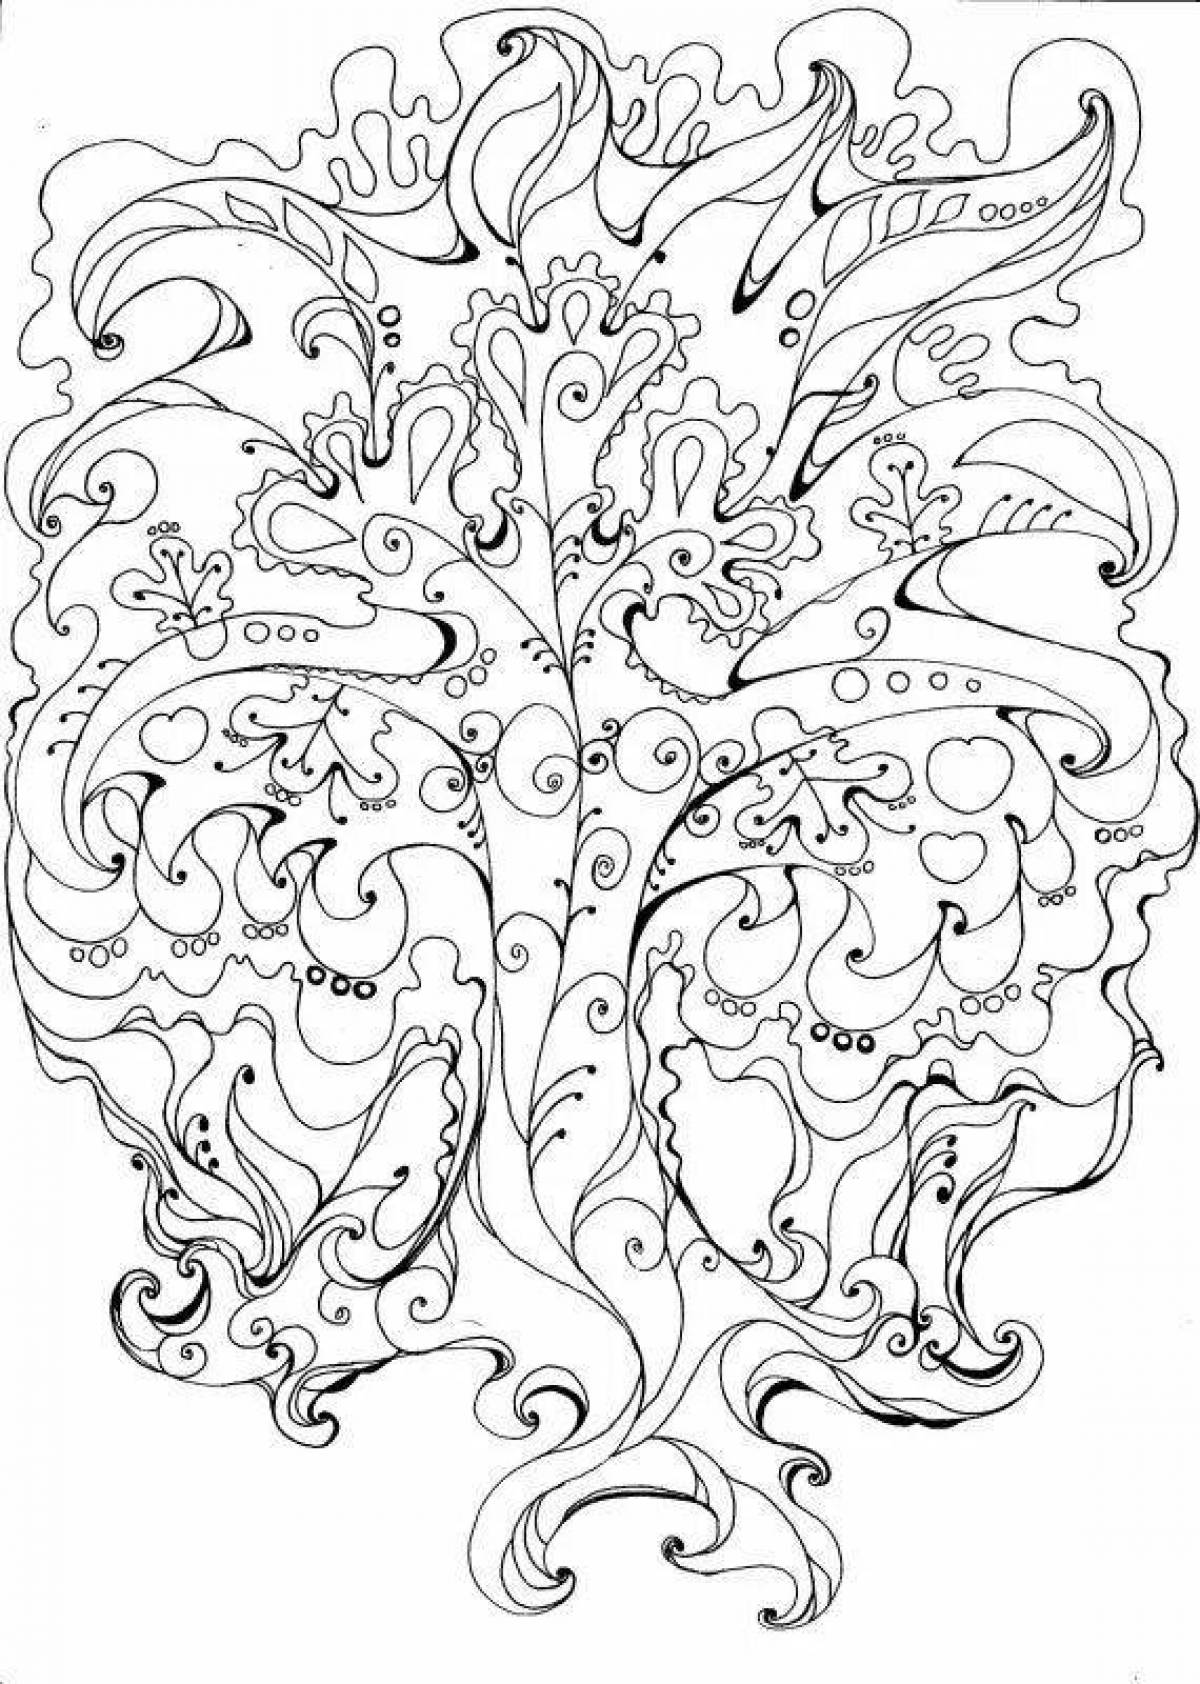 Exalted tree of life coloring book